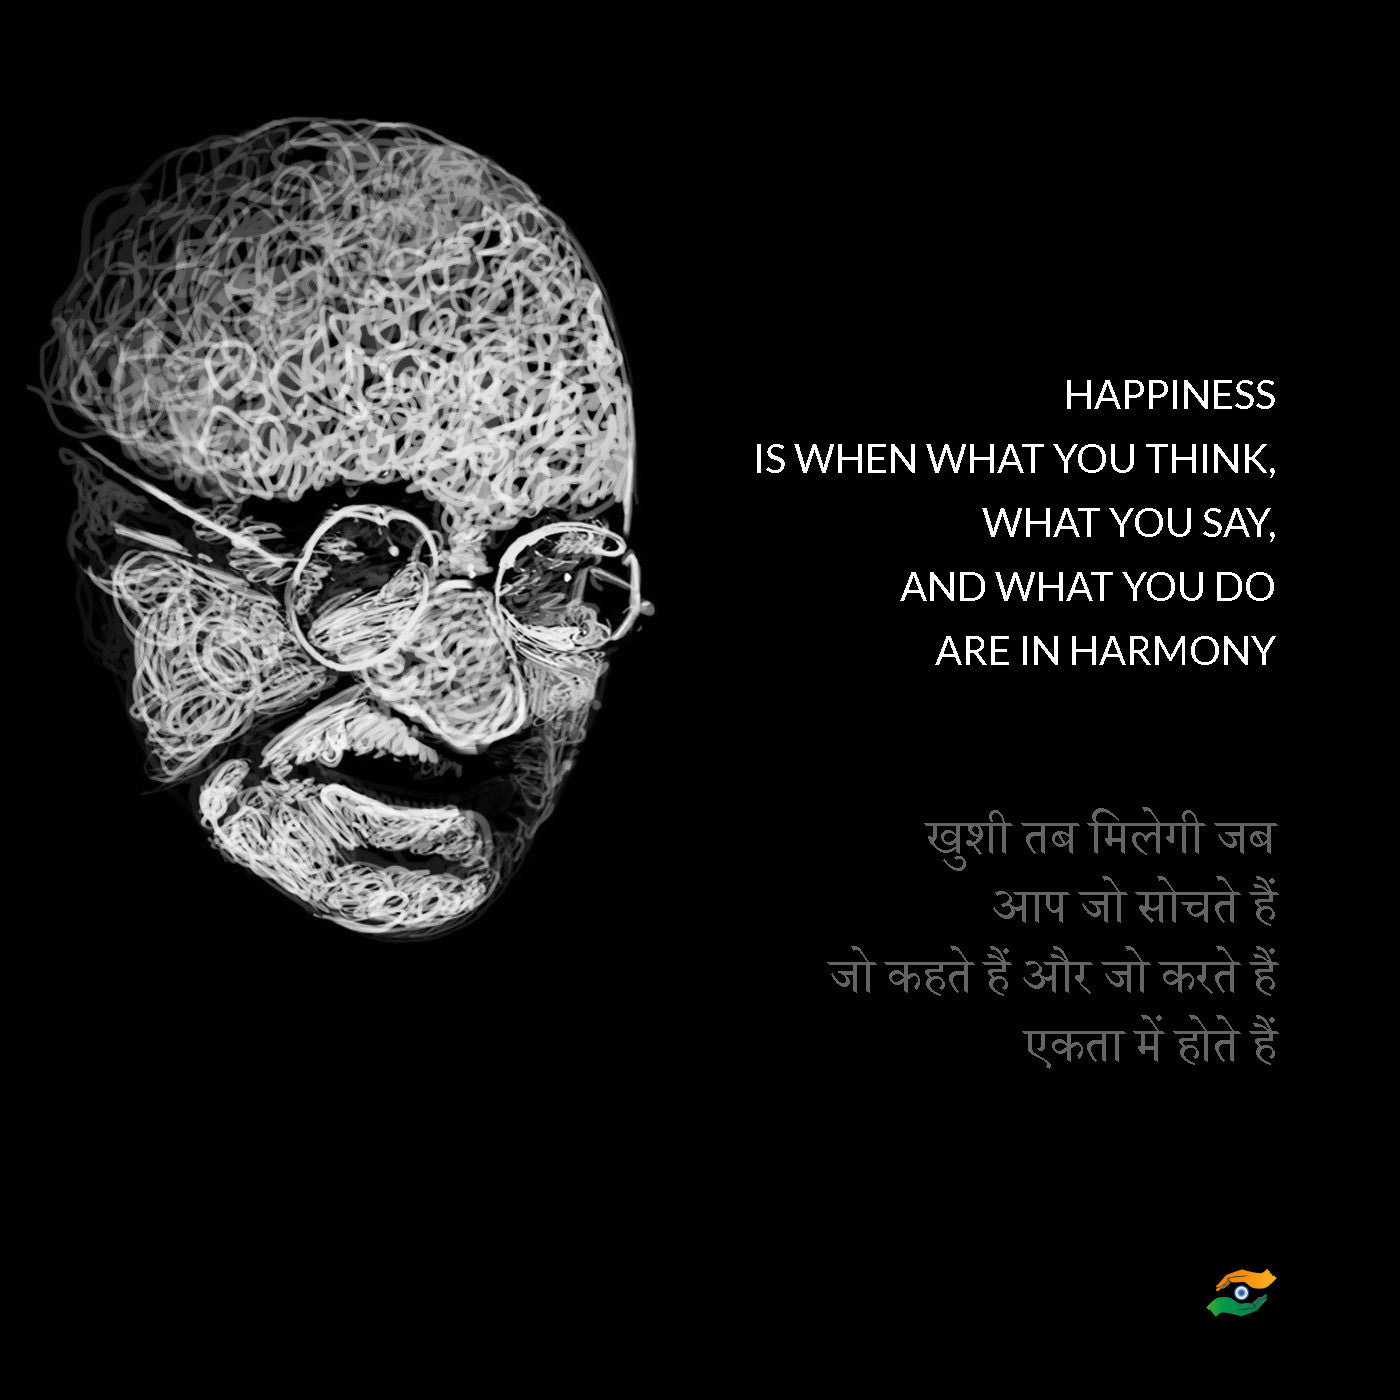 think different quotes in hindi